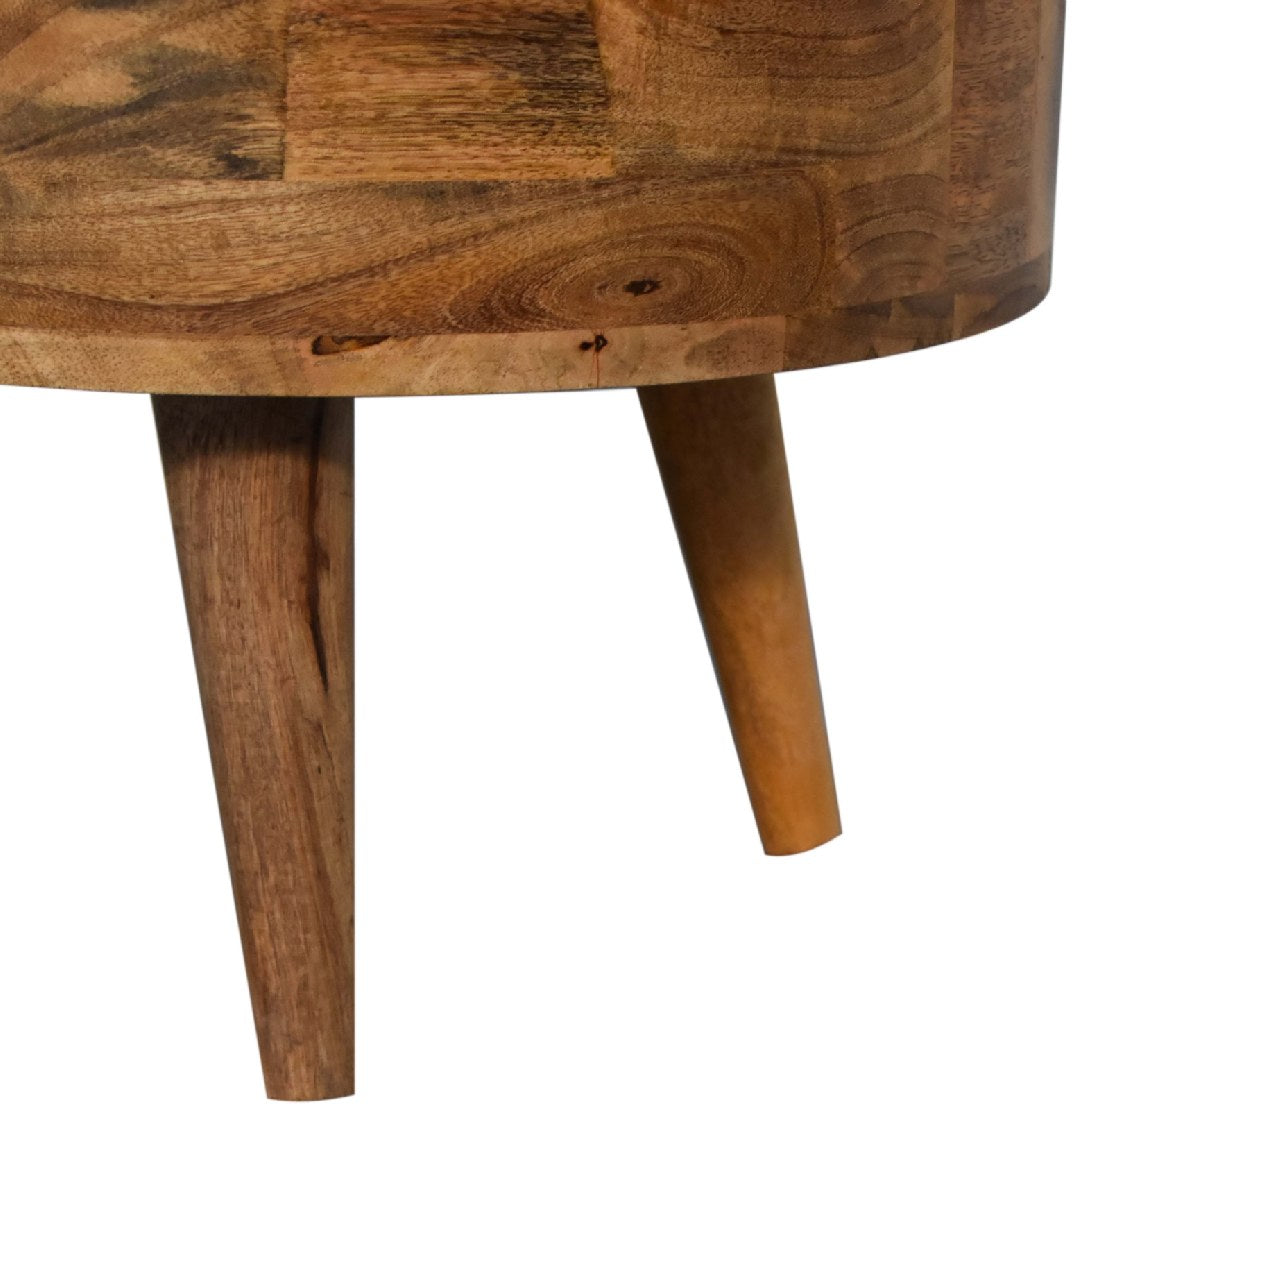 Mini Oak-ish Rounded Small Coffee Table - CasaFenix